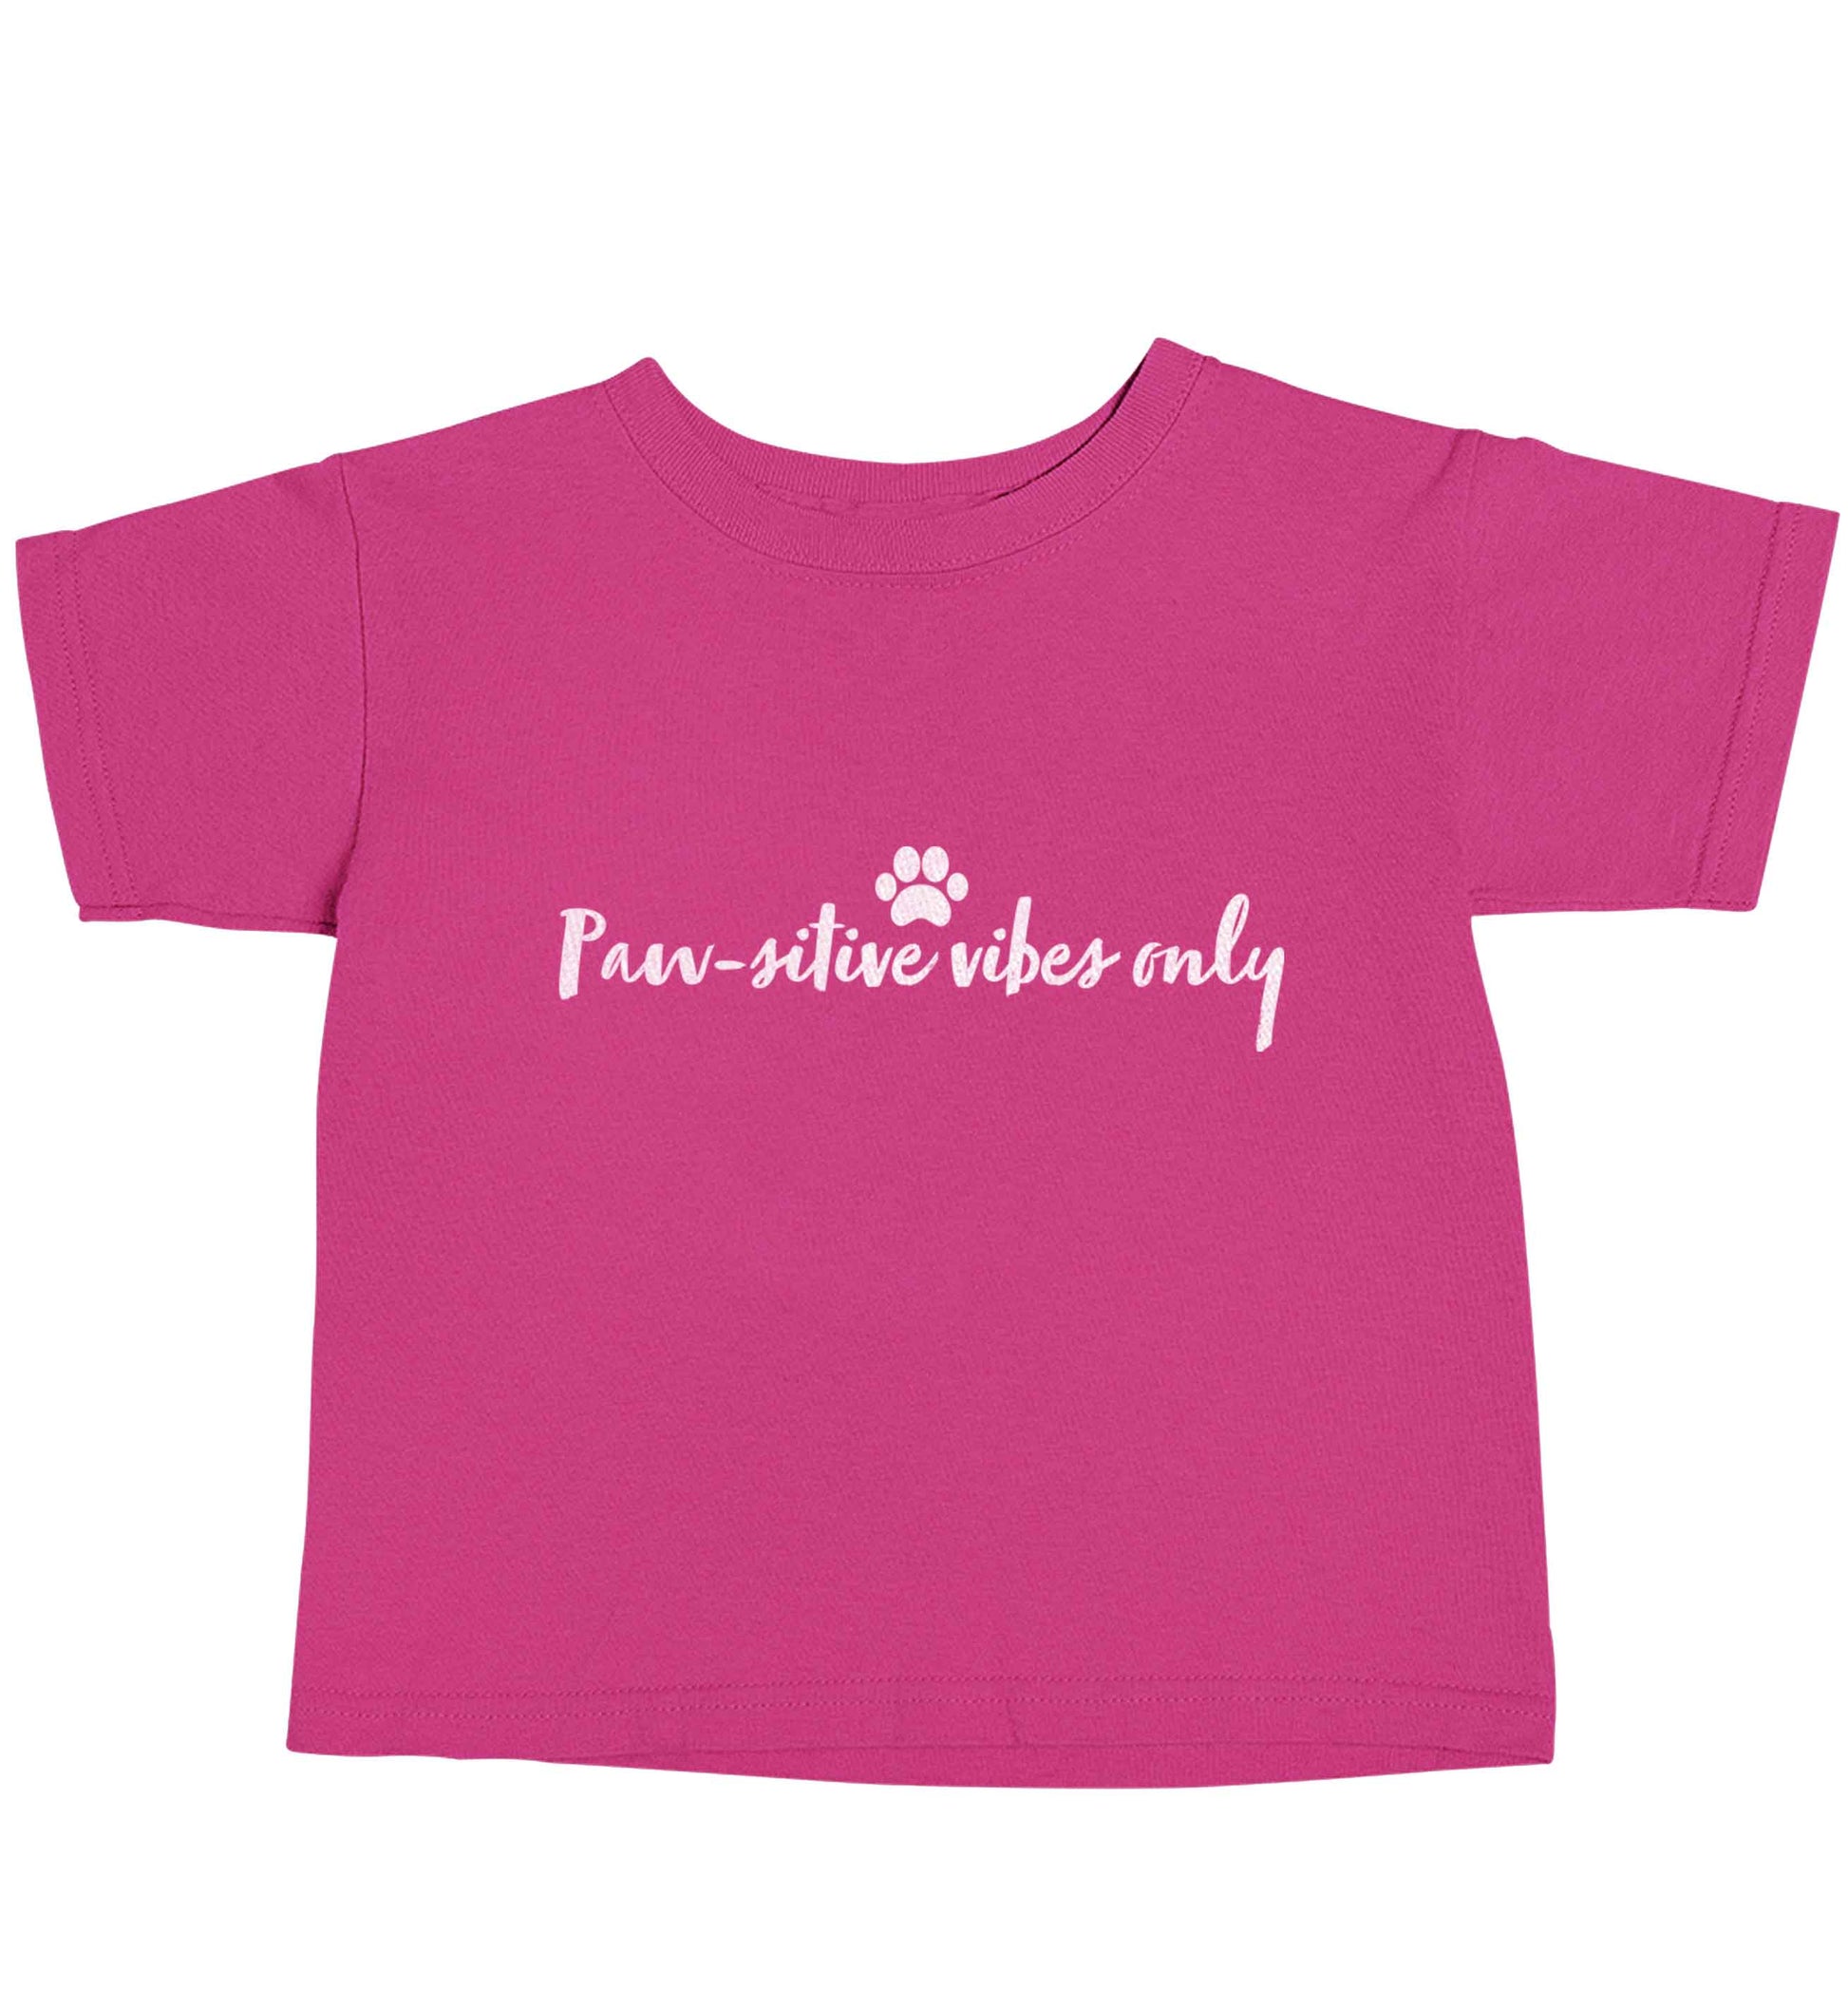 Pawsitive vibes only Kit pink baby toddler Tshirt 2 Years